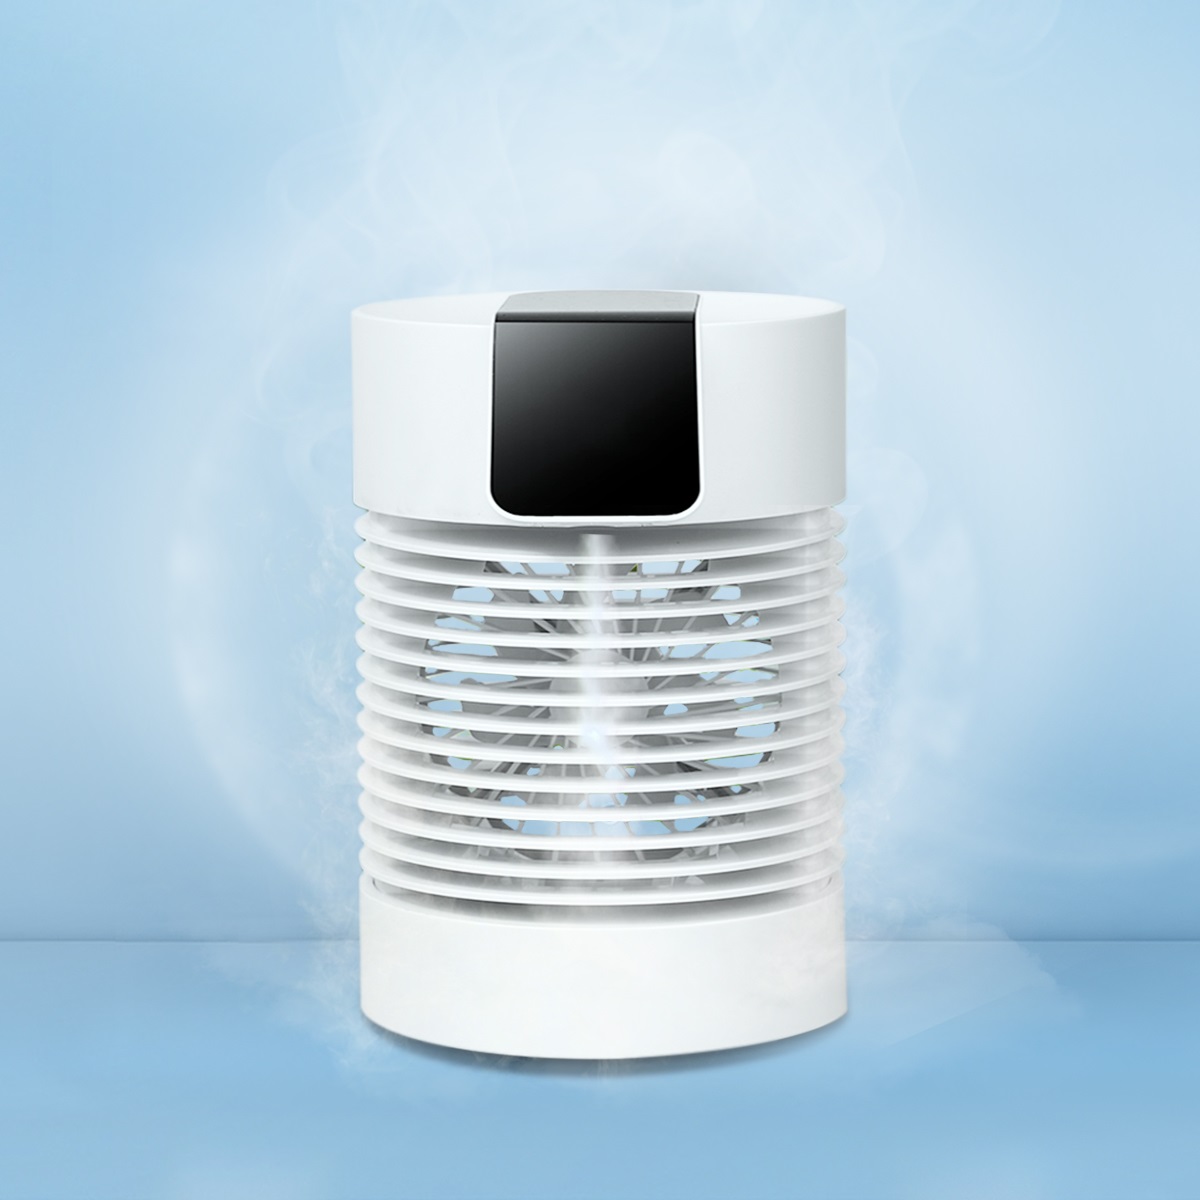 Ultrasound Water Air Conditioner Fans Mini Portable Rechargeable Desk Fan Spray Humidifier Misting Air Mist Conditioner Cooling Table Fans 